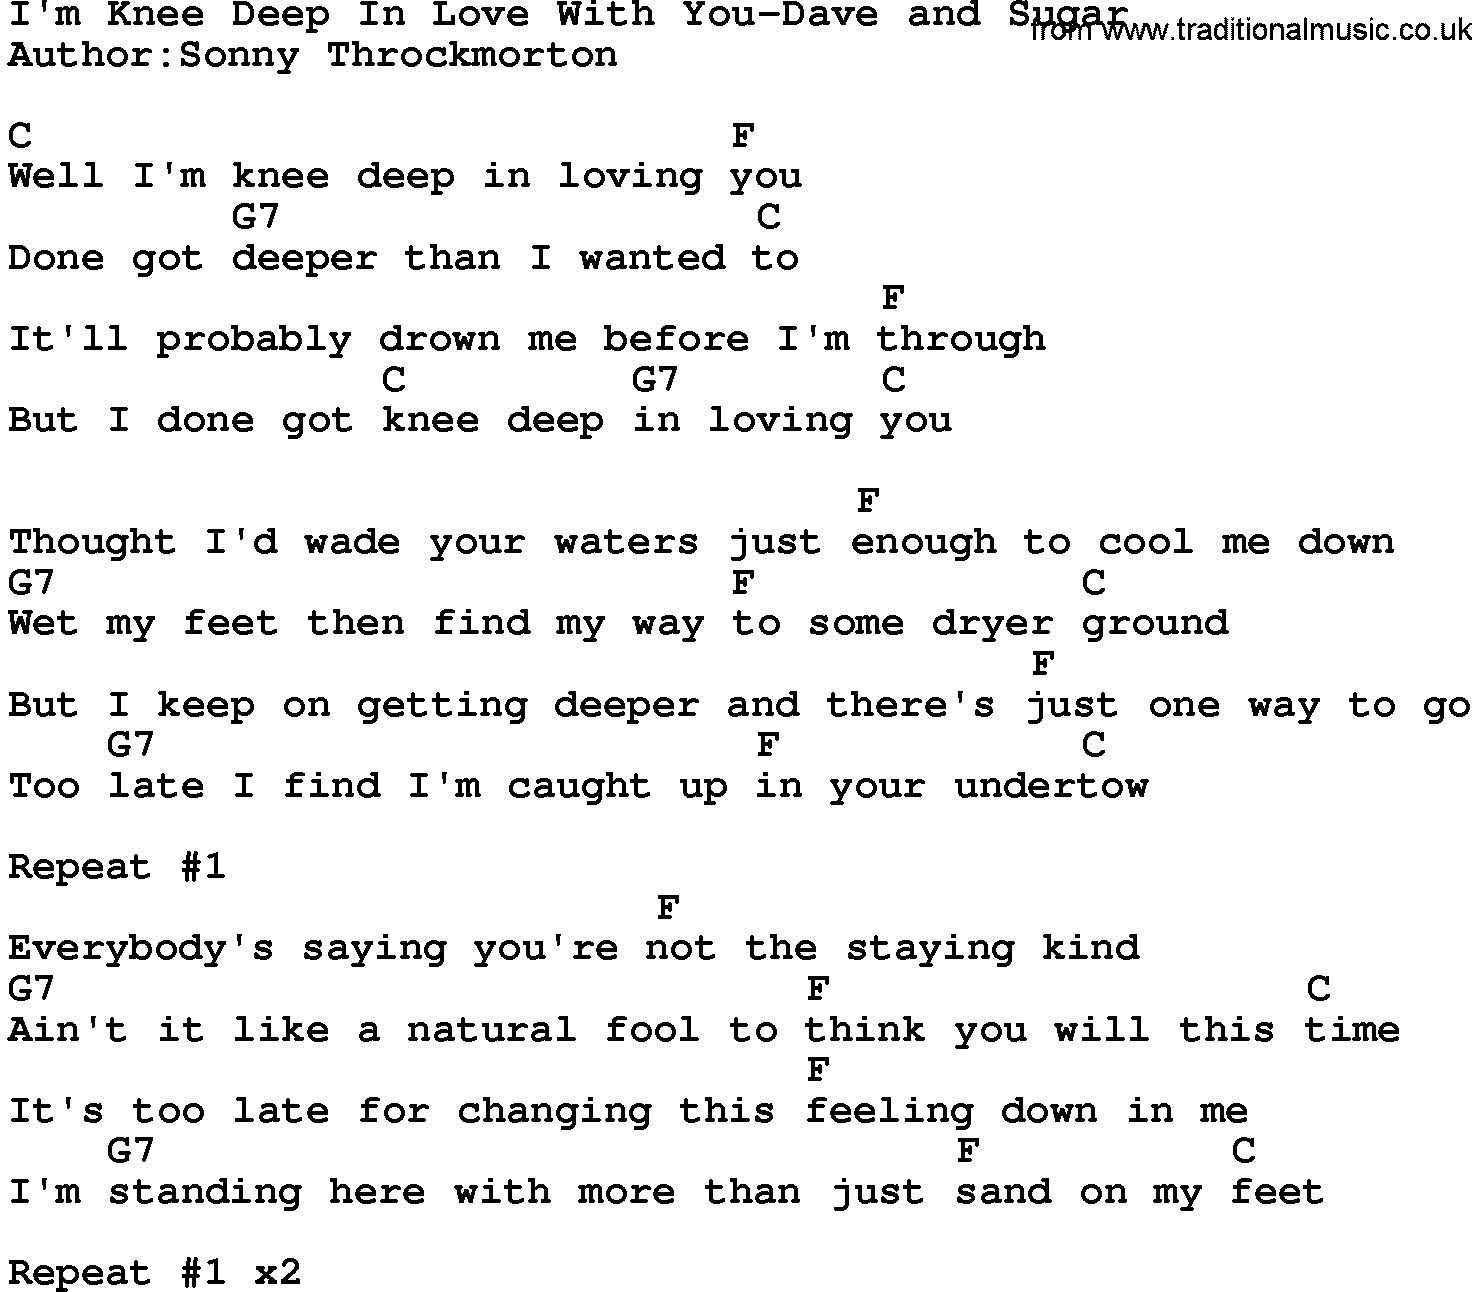 Country music song: I'm Knee Deep In Love With You-Dave And Sugar lyrics and chords